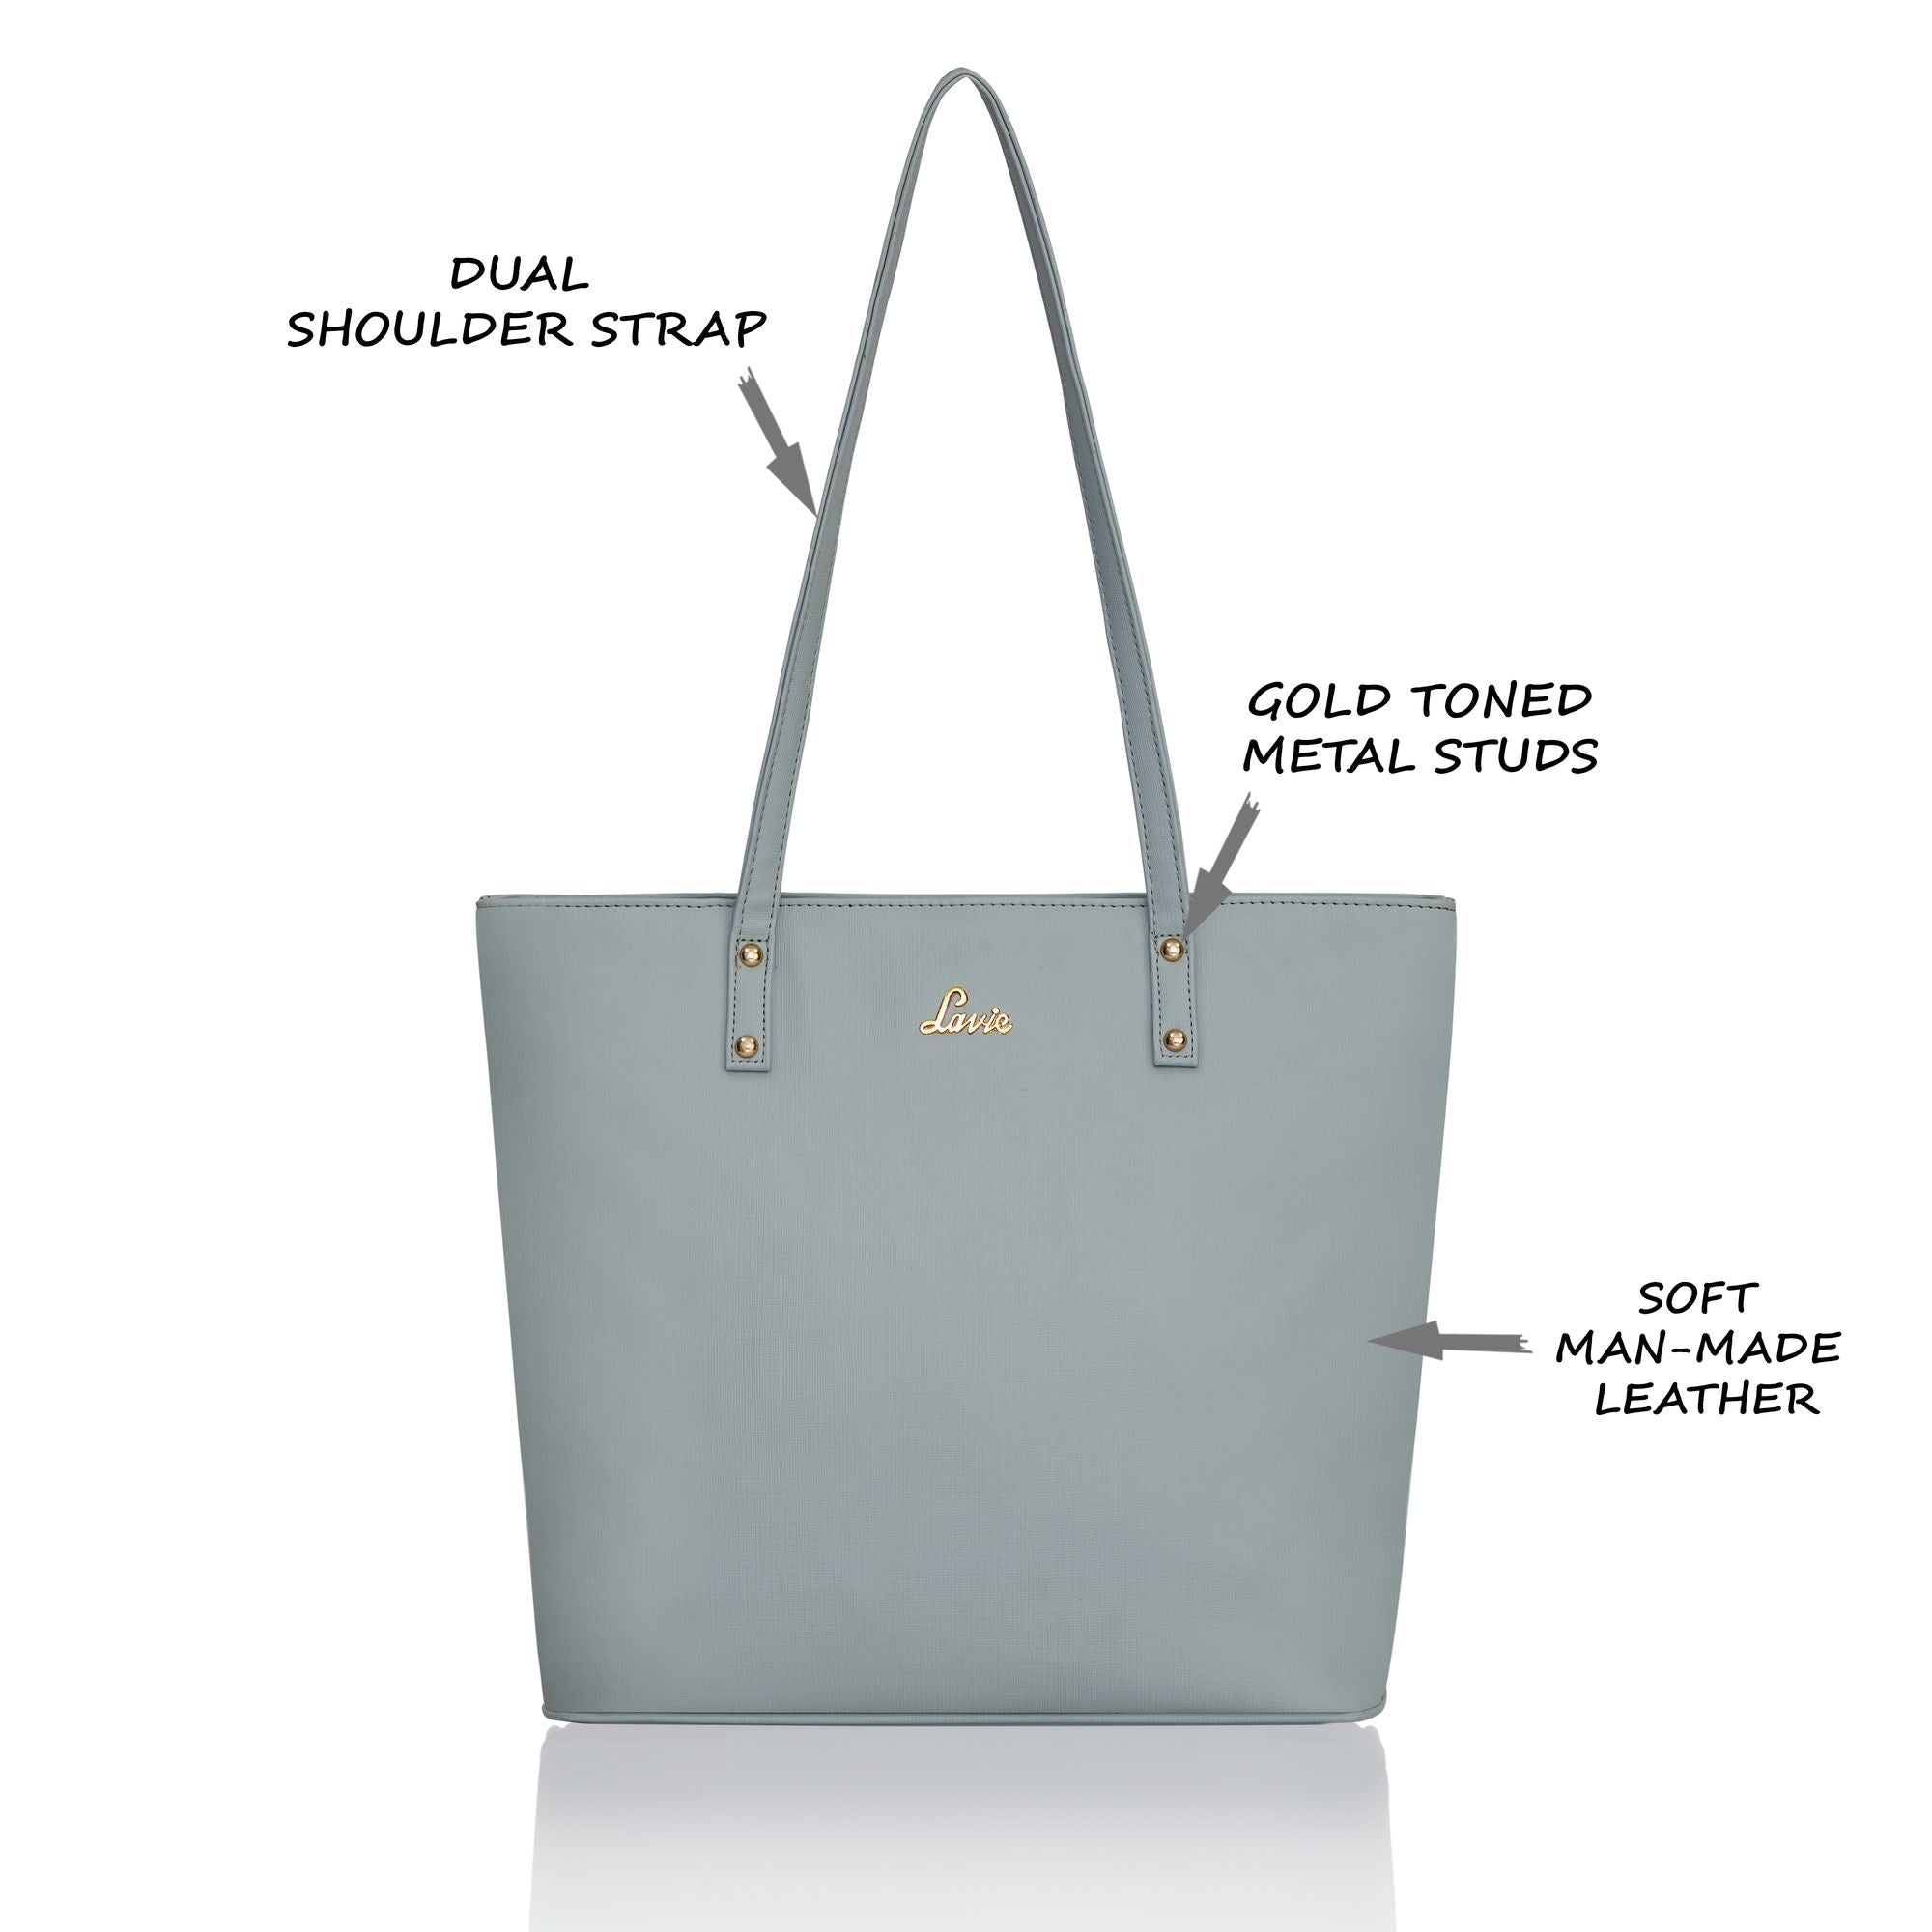 What Exactly Is A Tote Bag? The Complete Guide To Tote Bags And Their Uses  - Fatfatiya